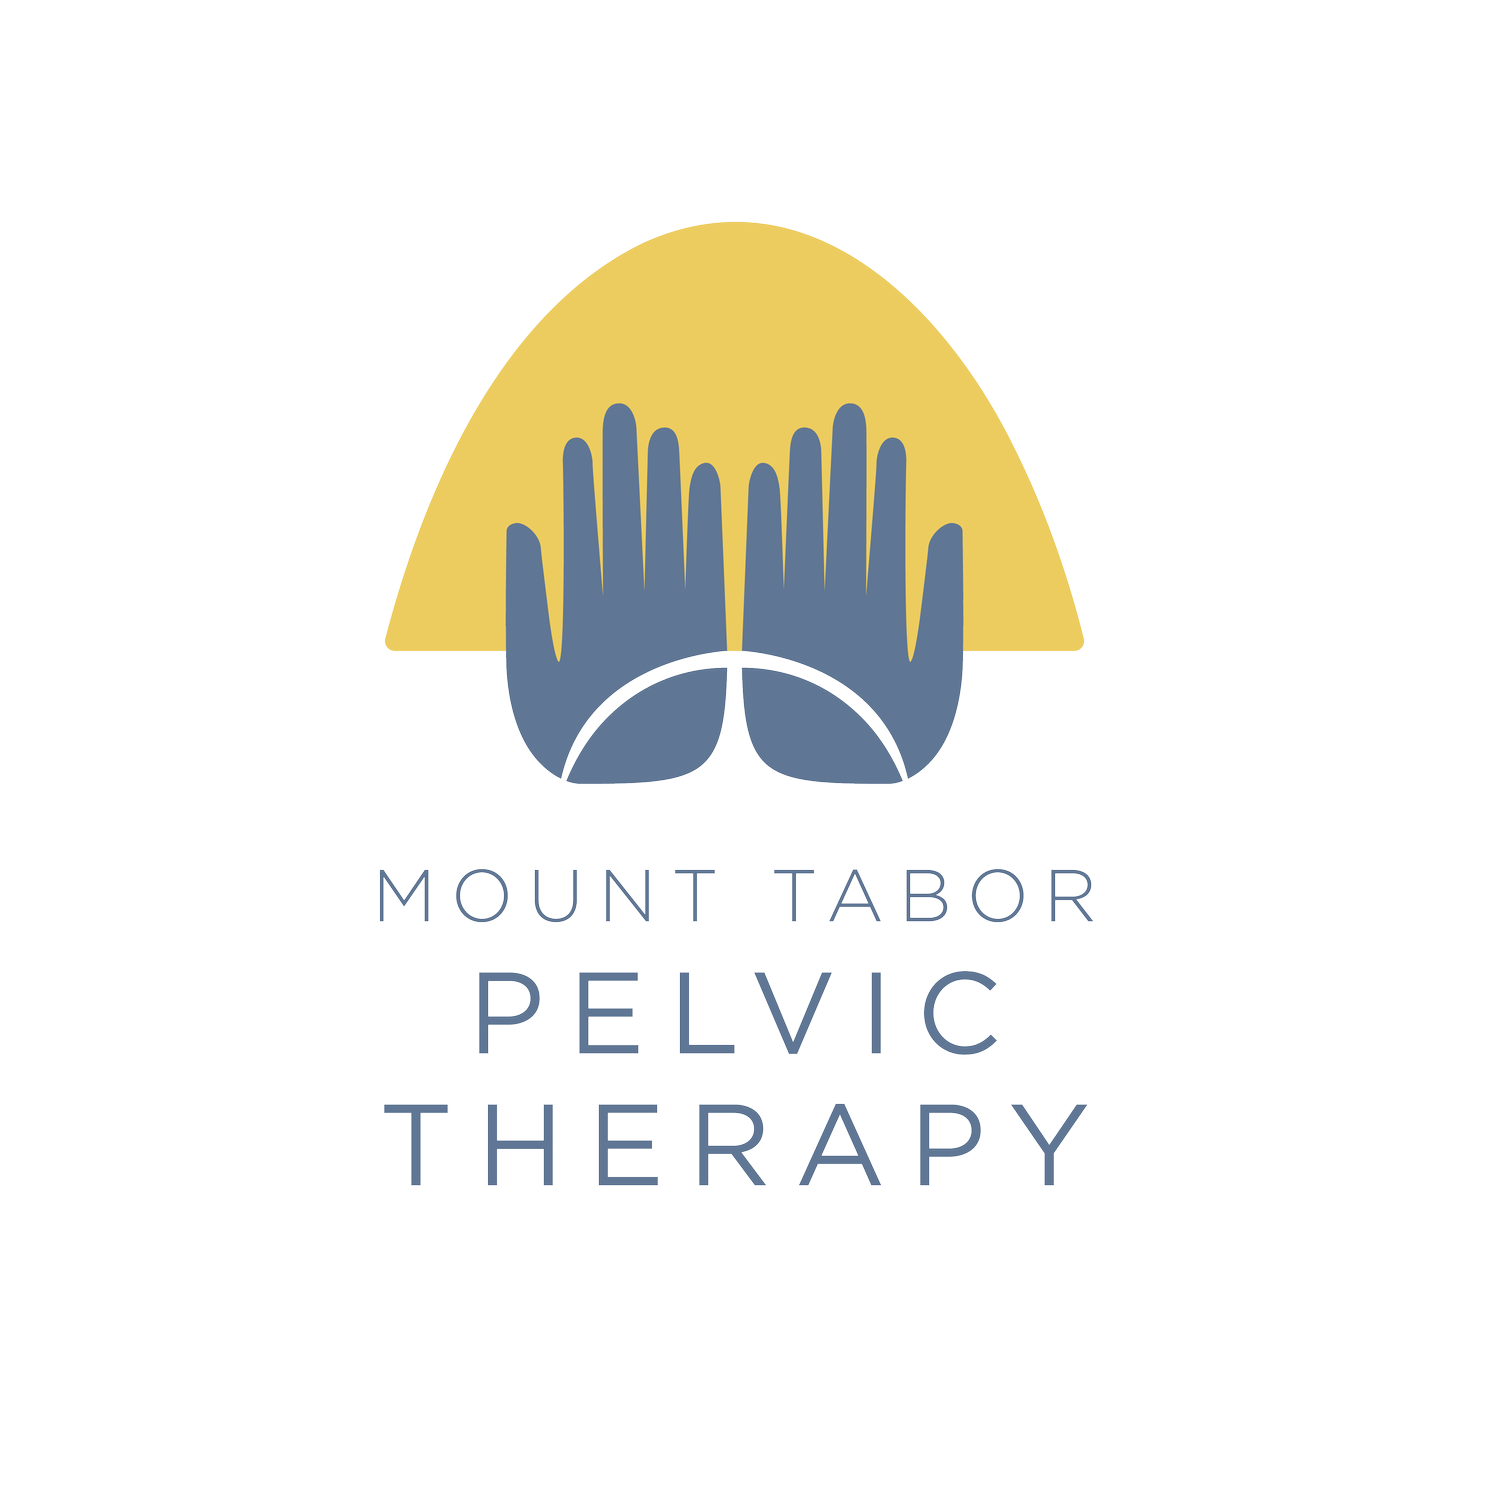 Mount Tabor Pelvic Therapy